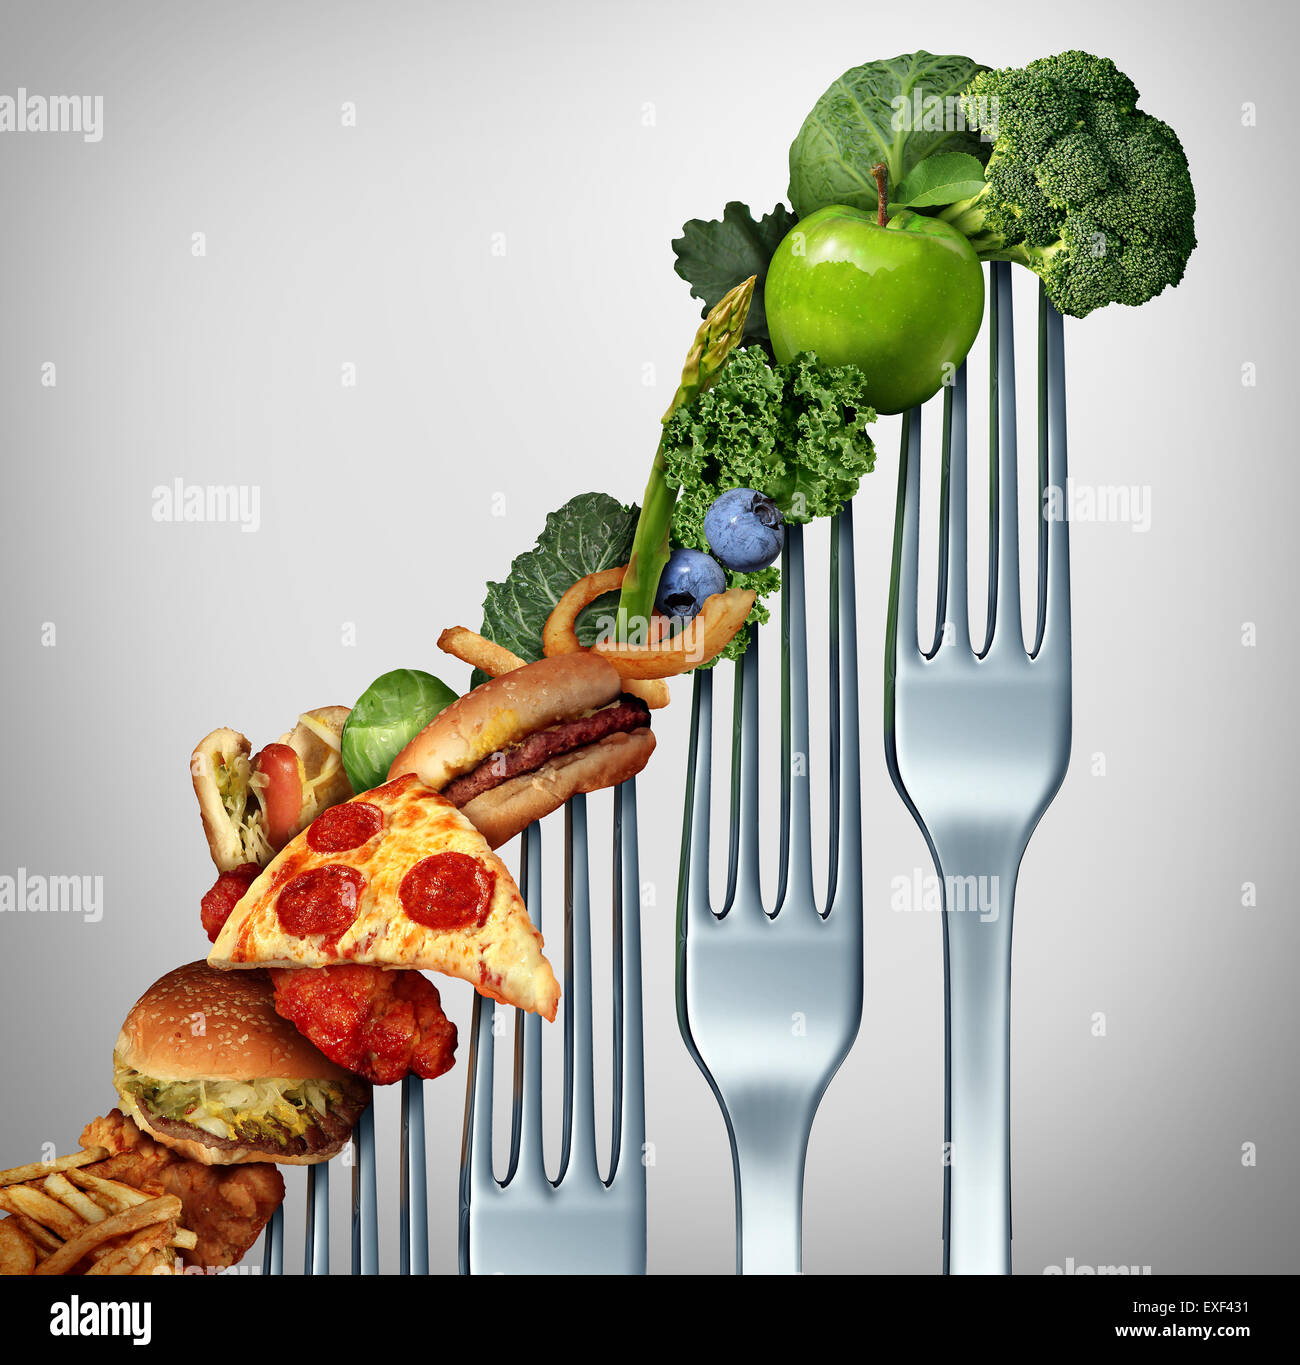 Diet progress change as a healthy lifestyle improvement concept and evolving to accept the challenge of eating raw food and losing weight as a group of rising forks with meal items on them from fatty food towards vegetables and fruit. Stock Photo